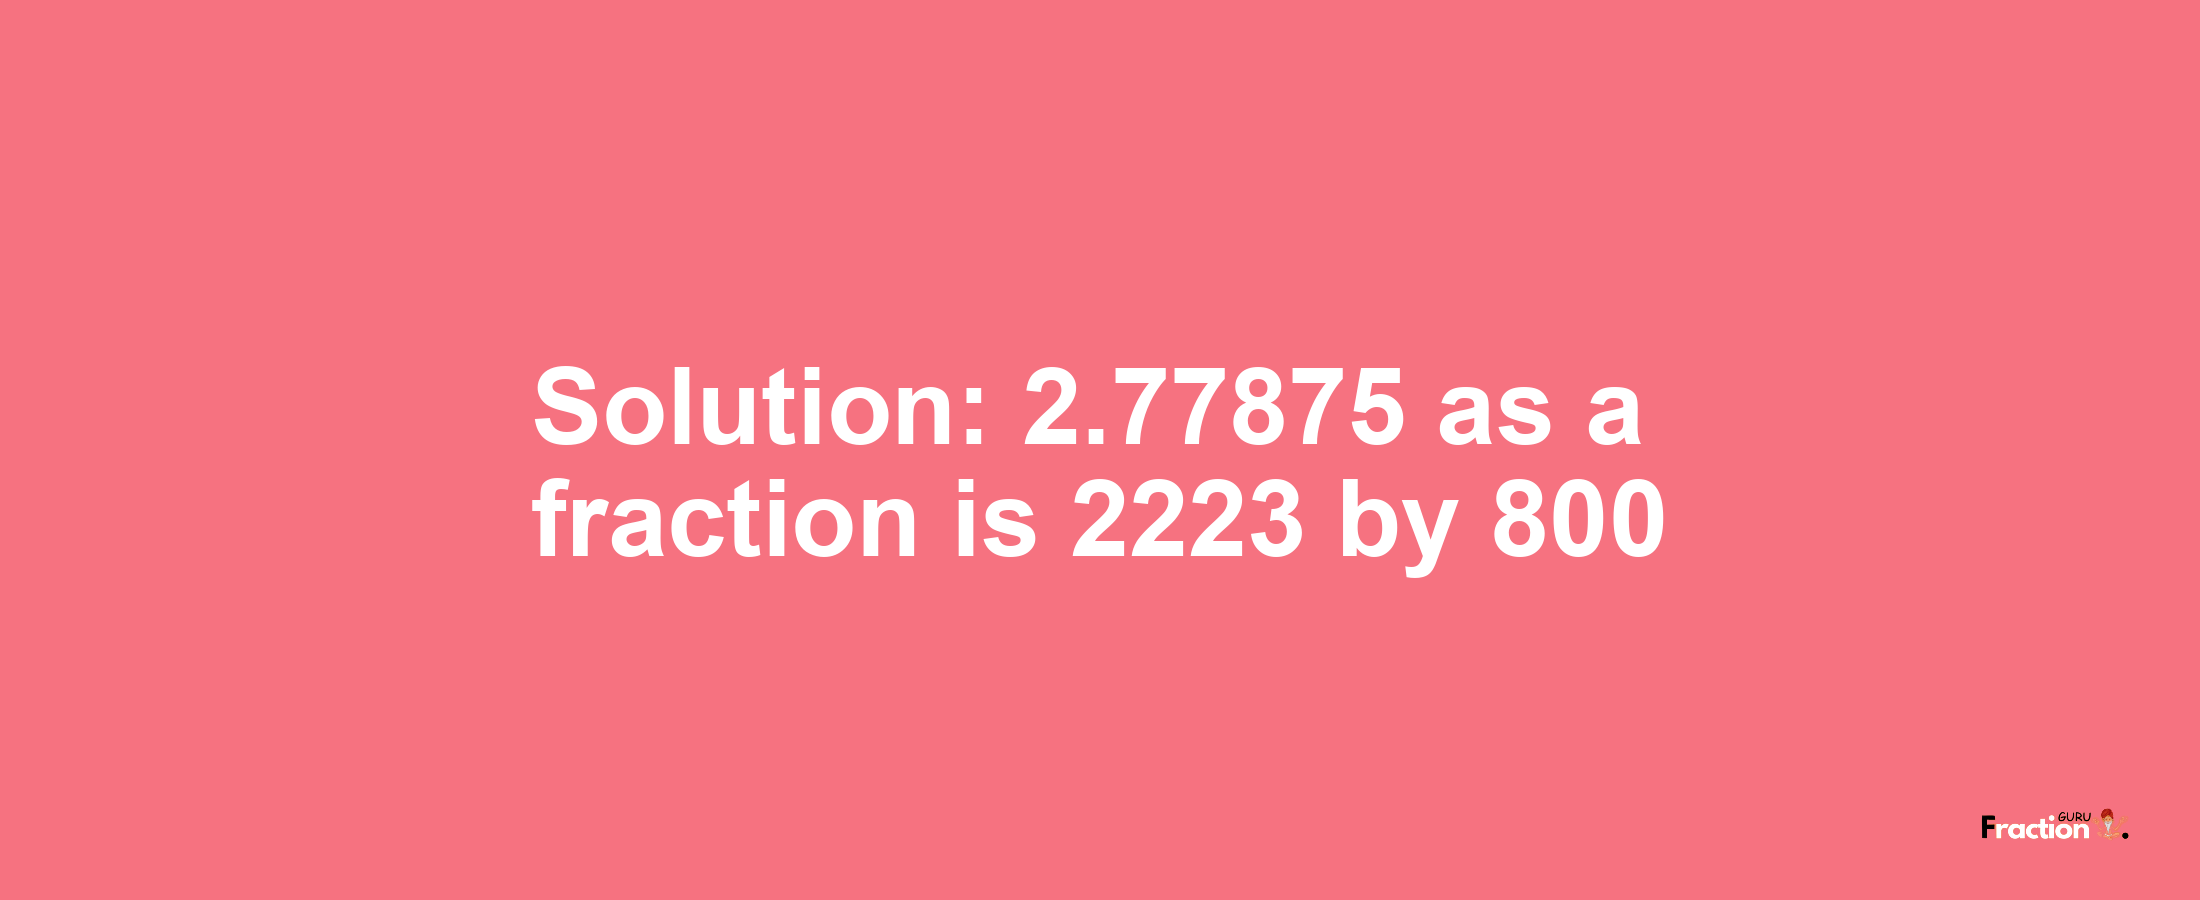 Solution:2.77875 as a fraction is 2223/800